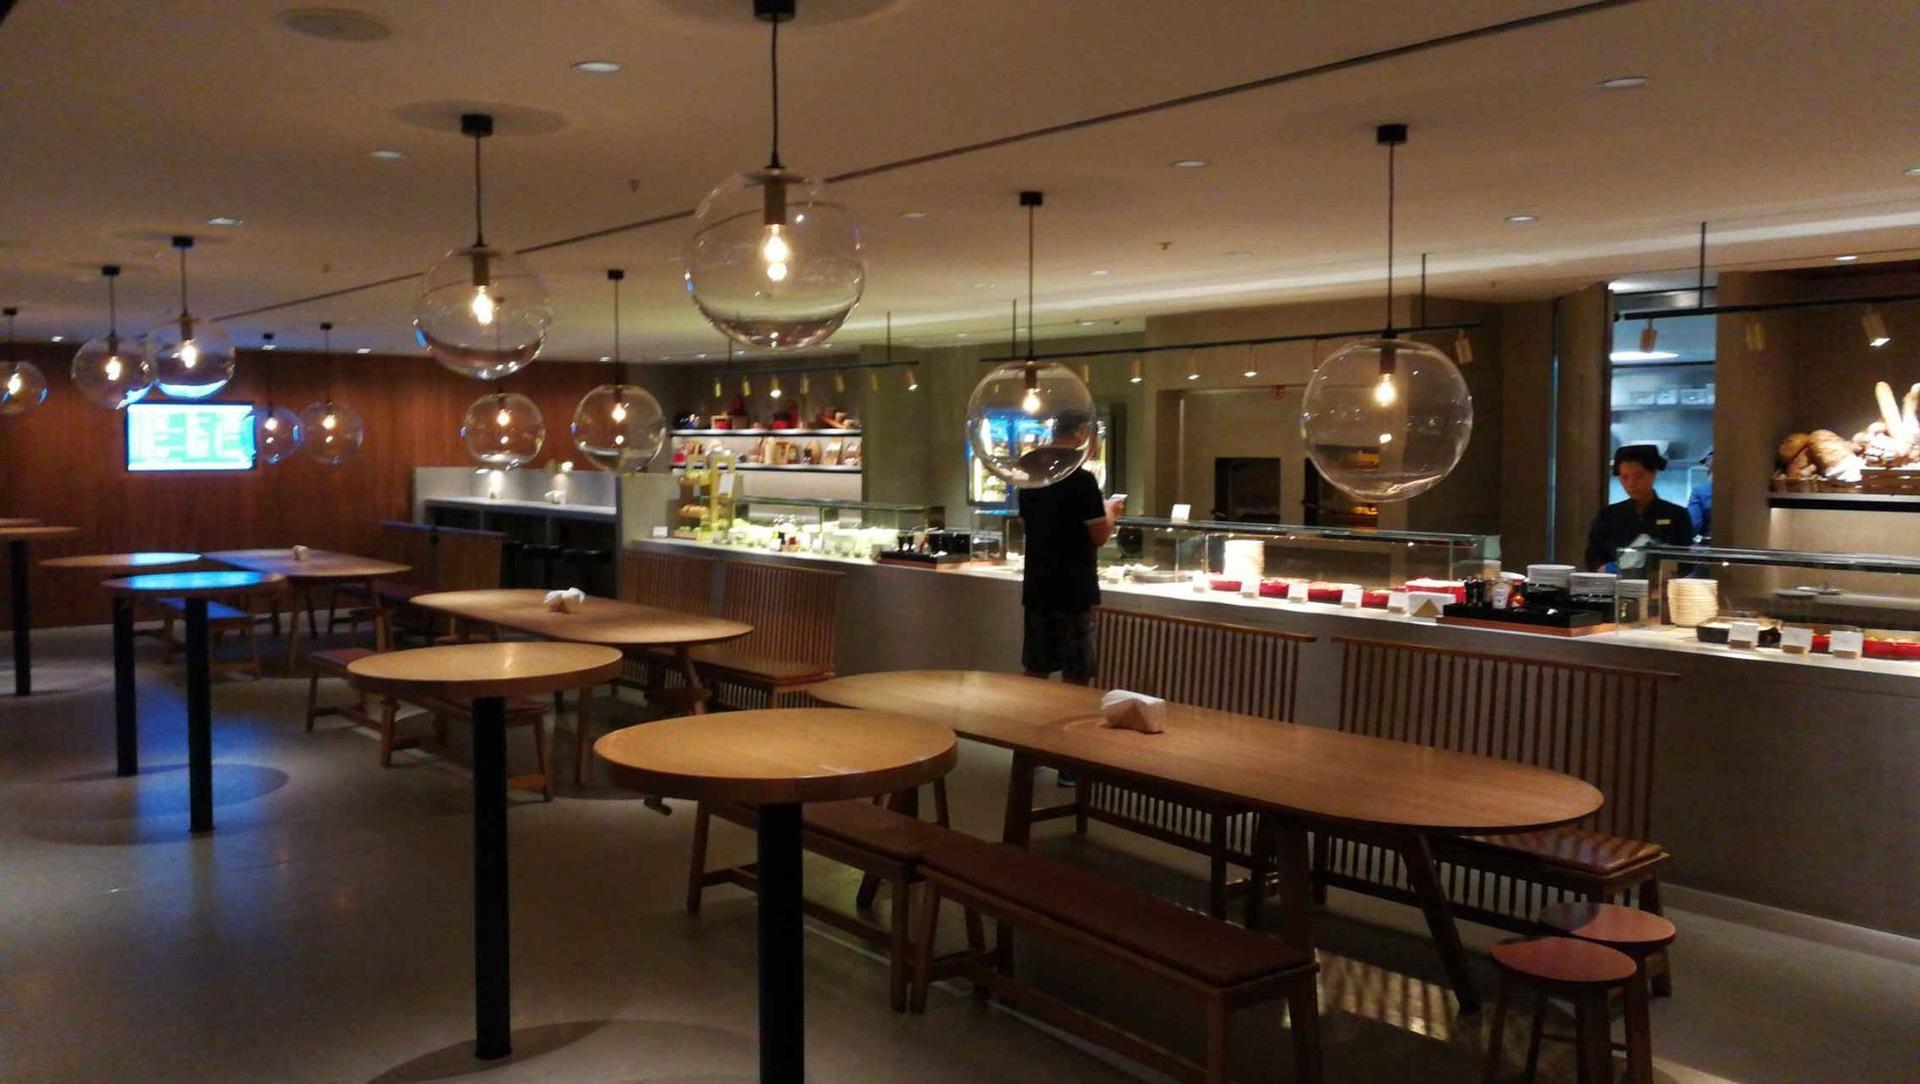 Cathay Pacific The Pier Business Class Lounge image 41 of 61